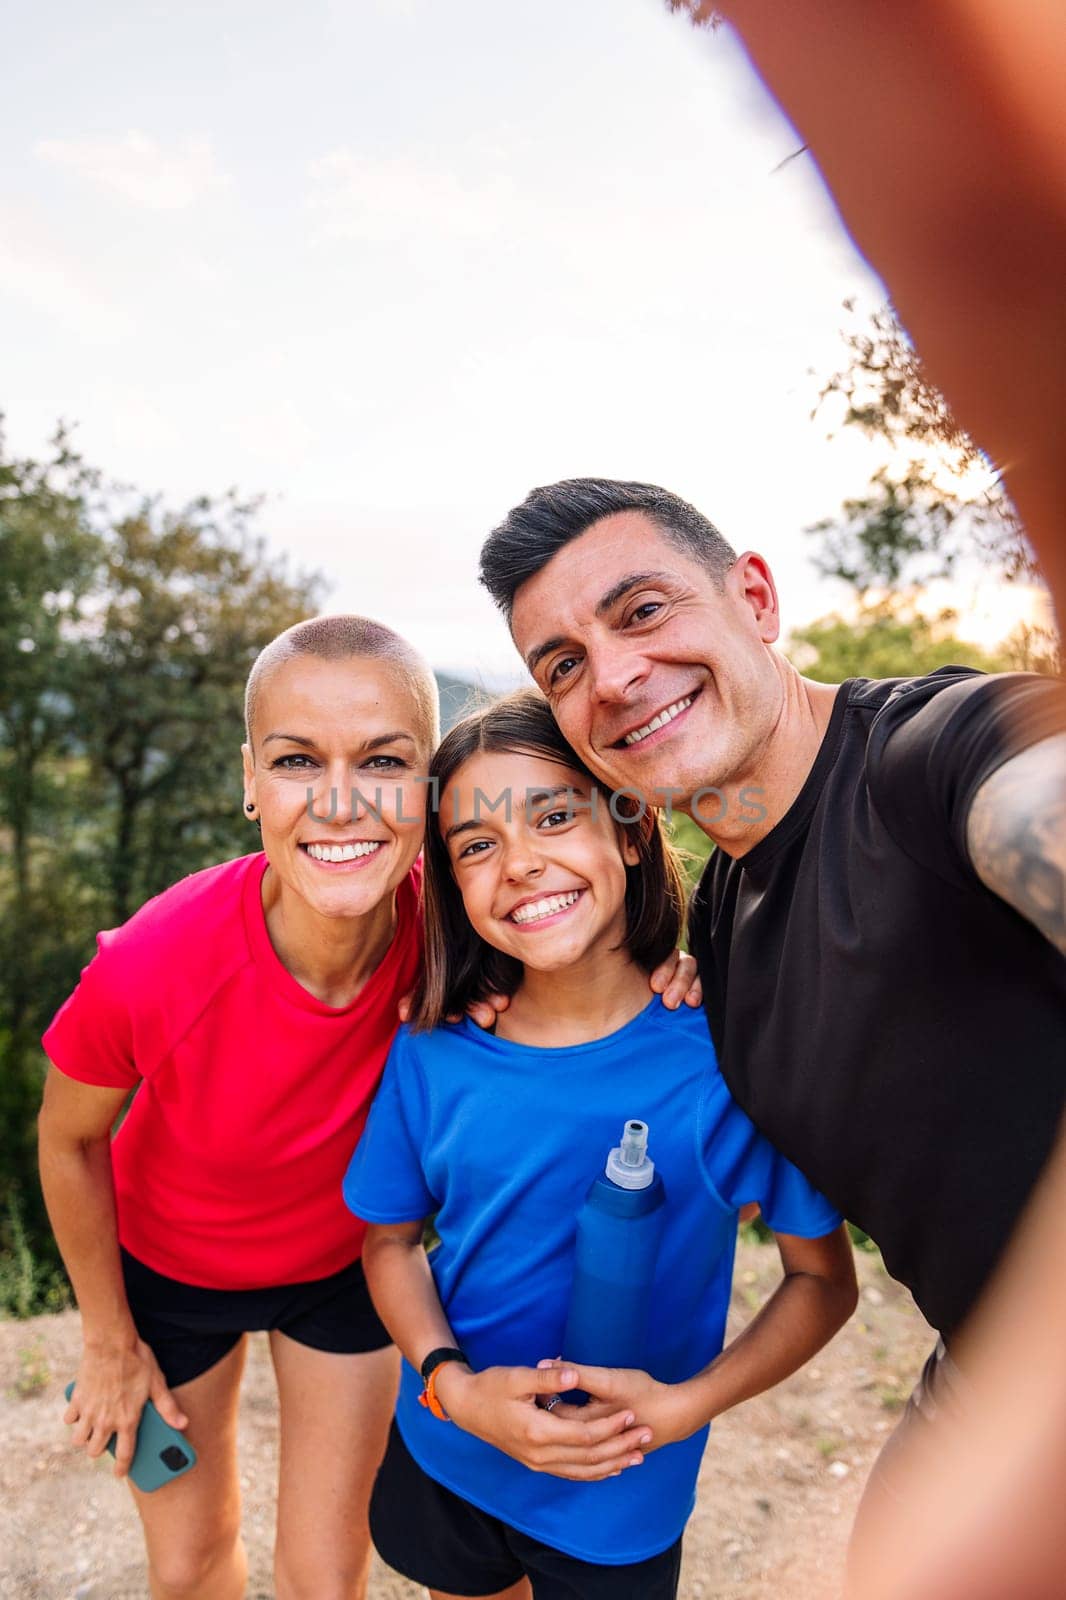 selfie photo of a happy sporty family in nature by raulmelldo